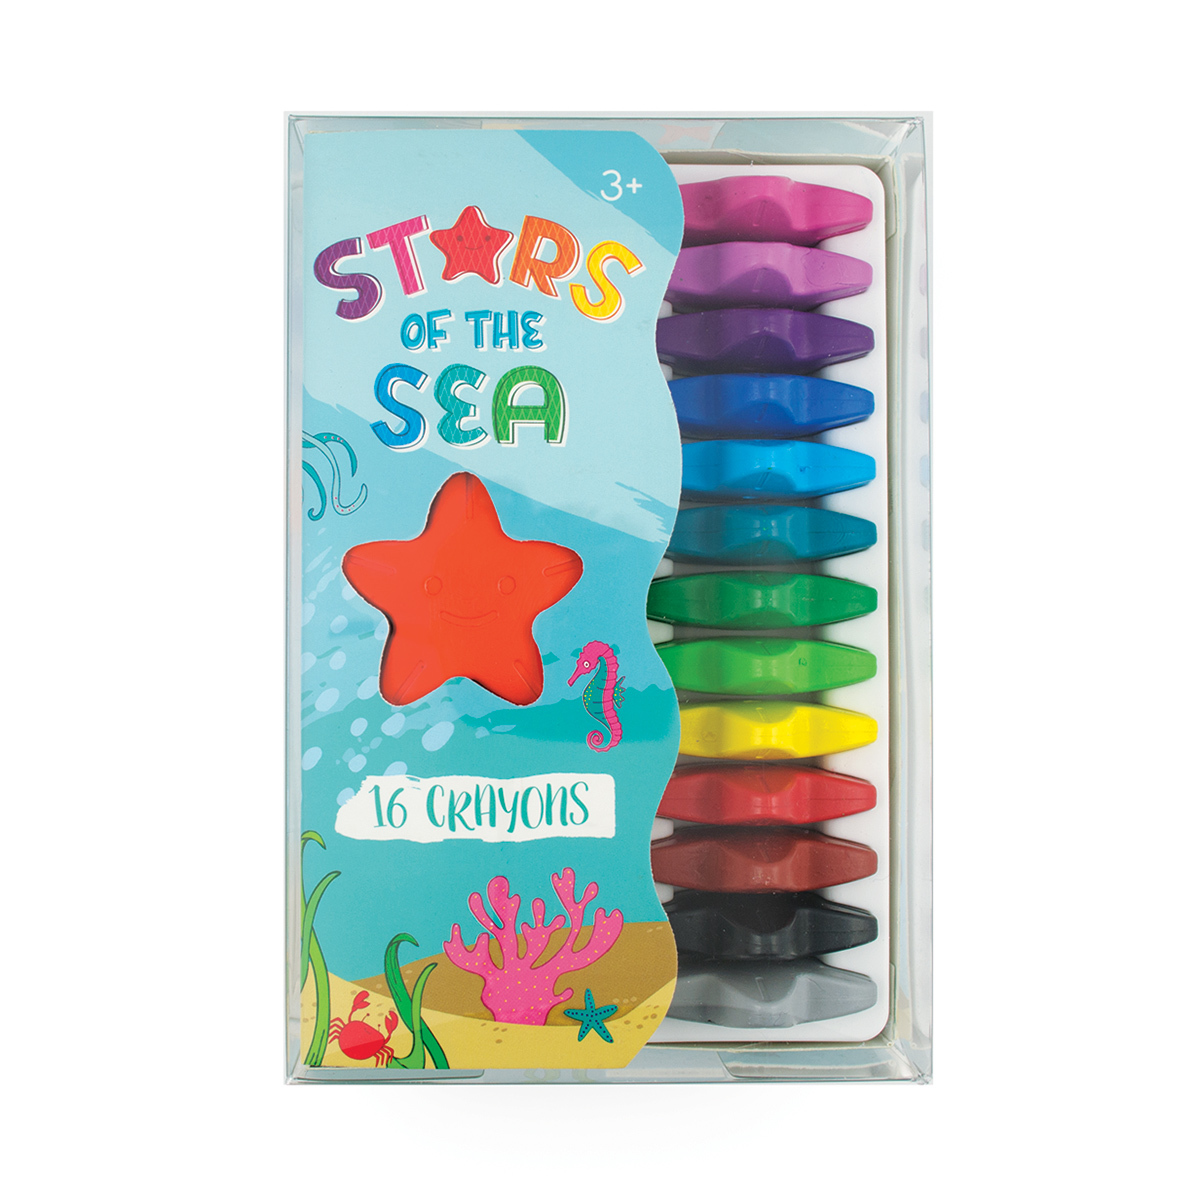 133-083_stars-of-the-sea-crayons__24735-1473447142-1280-1280